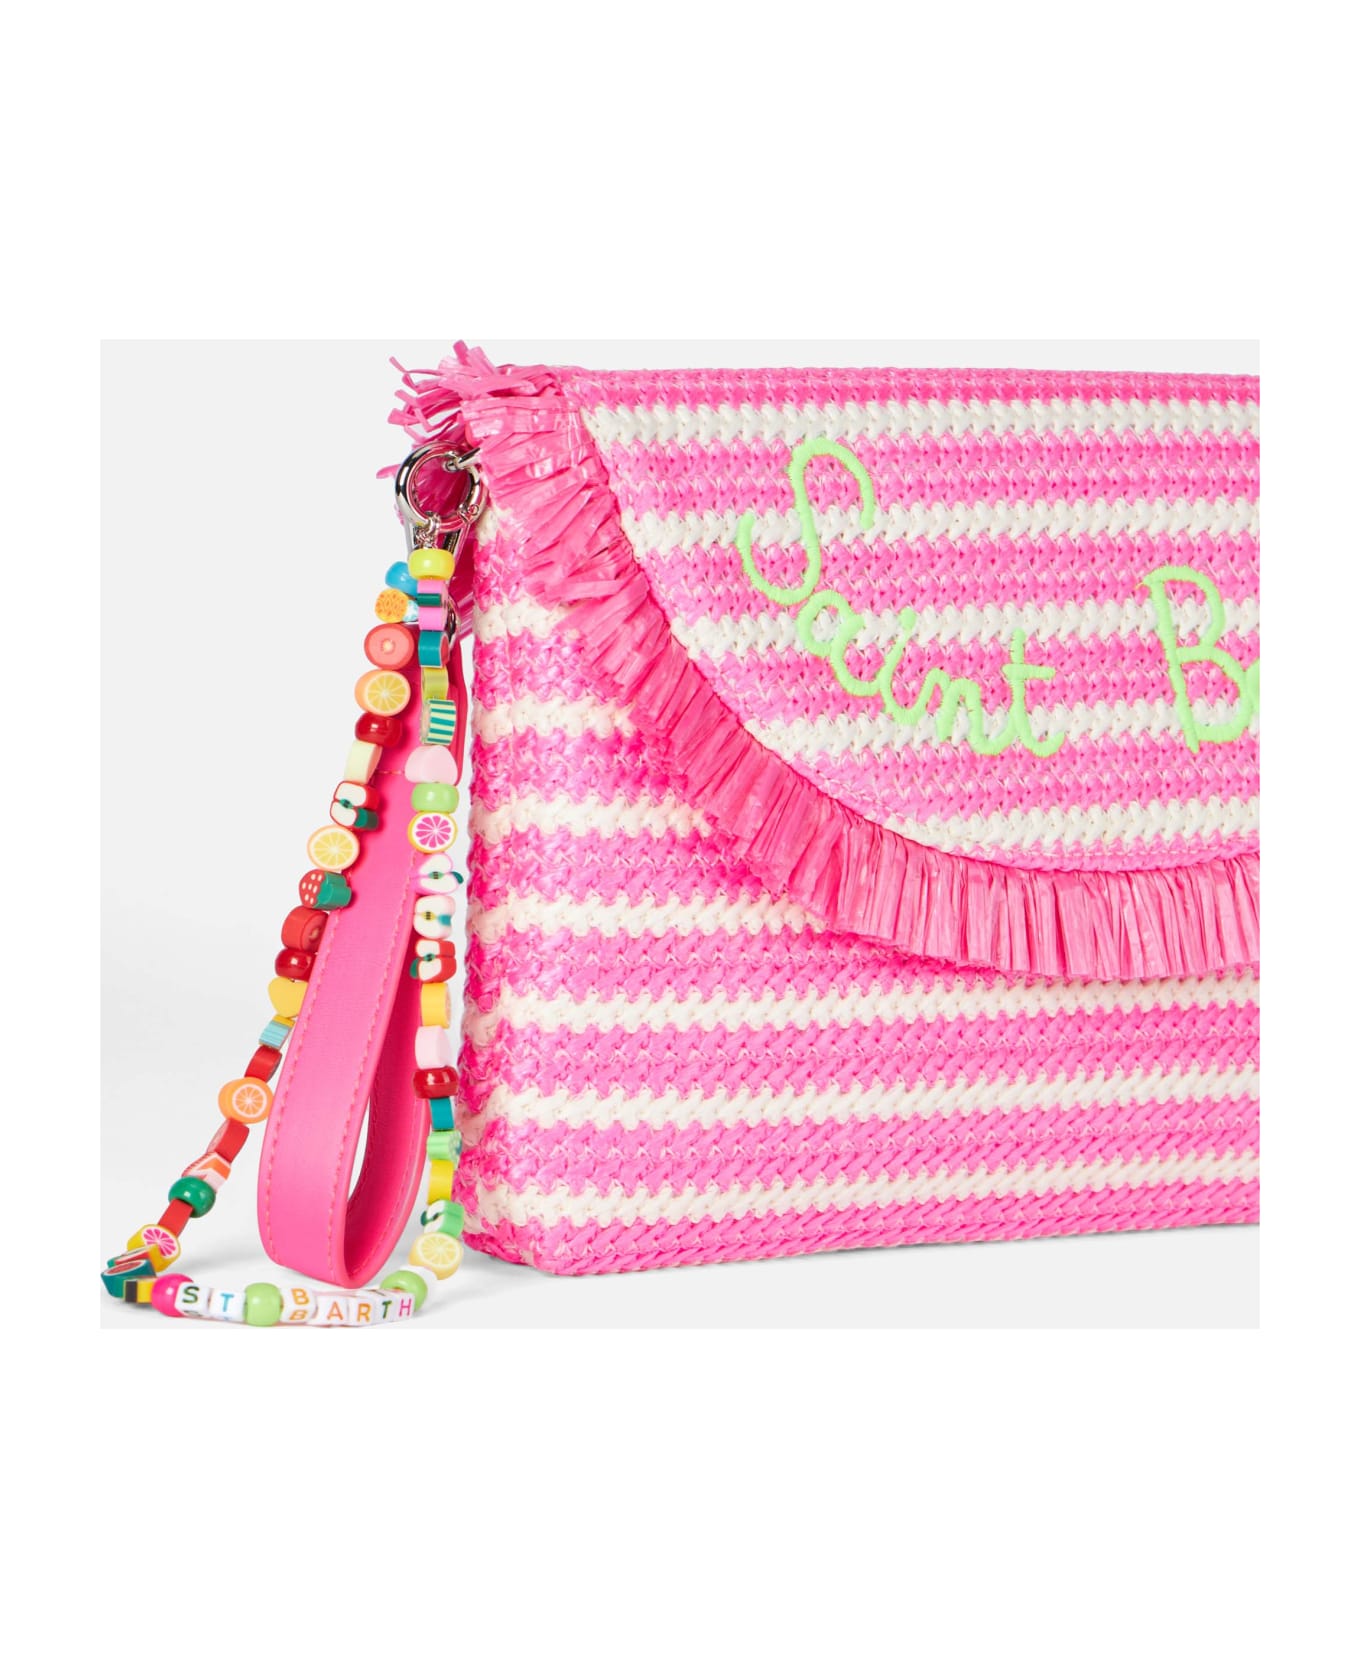 MC2 Saint Barth Straw Pochette With Fringes And Stripes - PINK